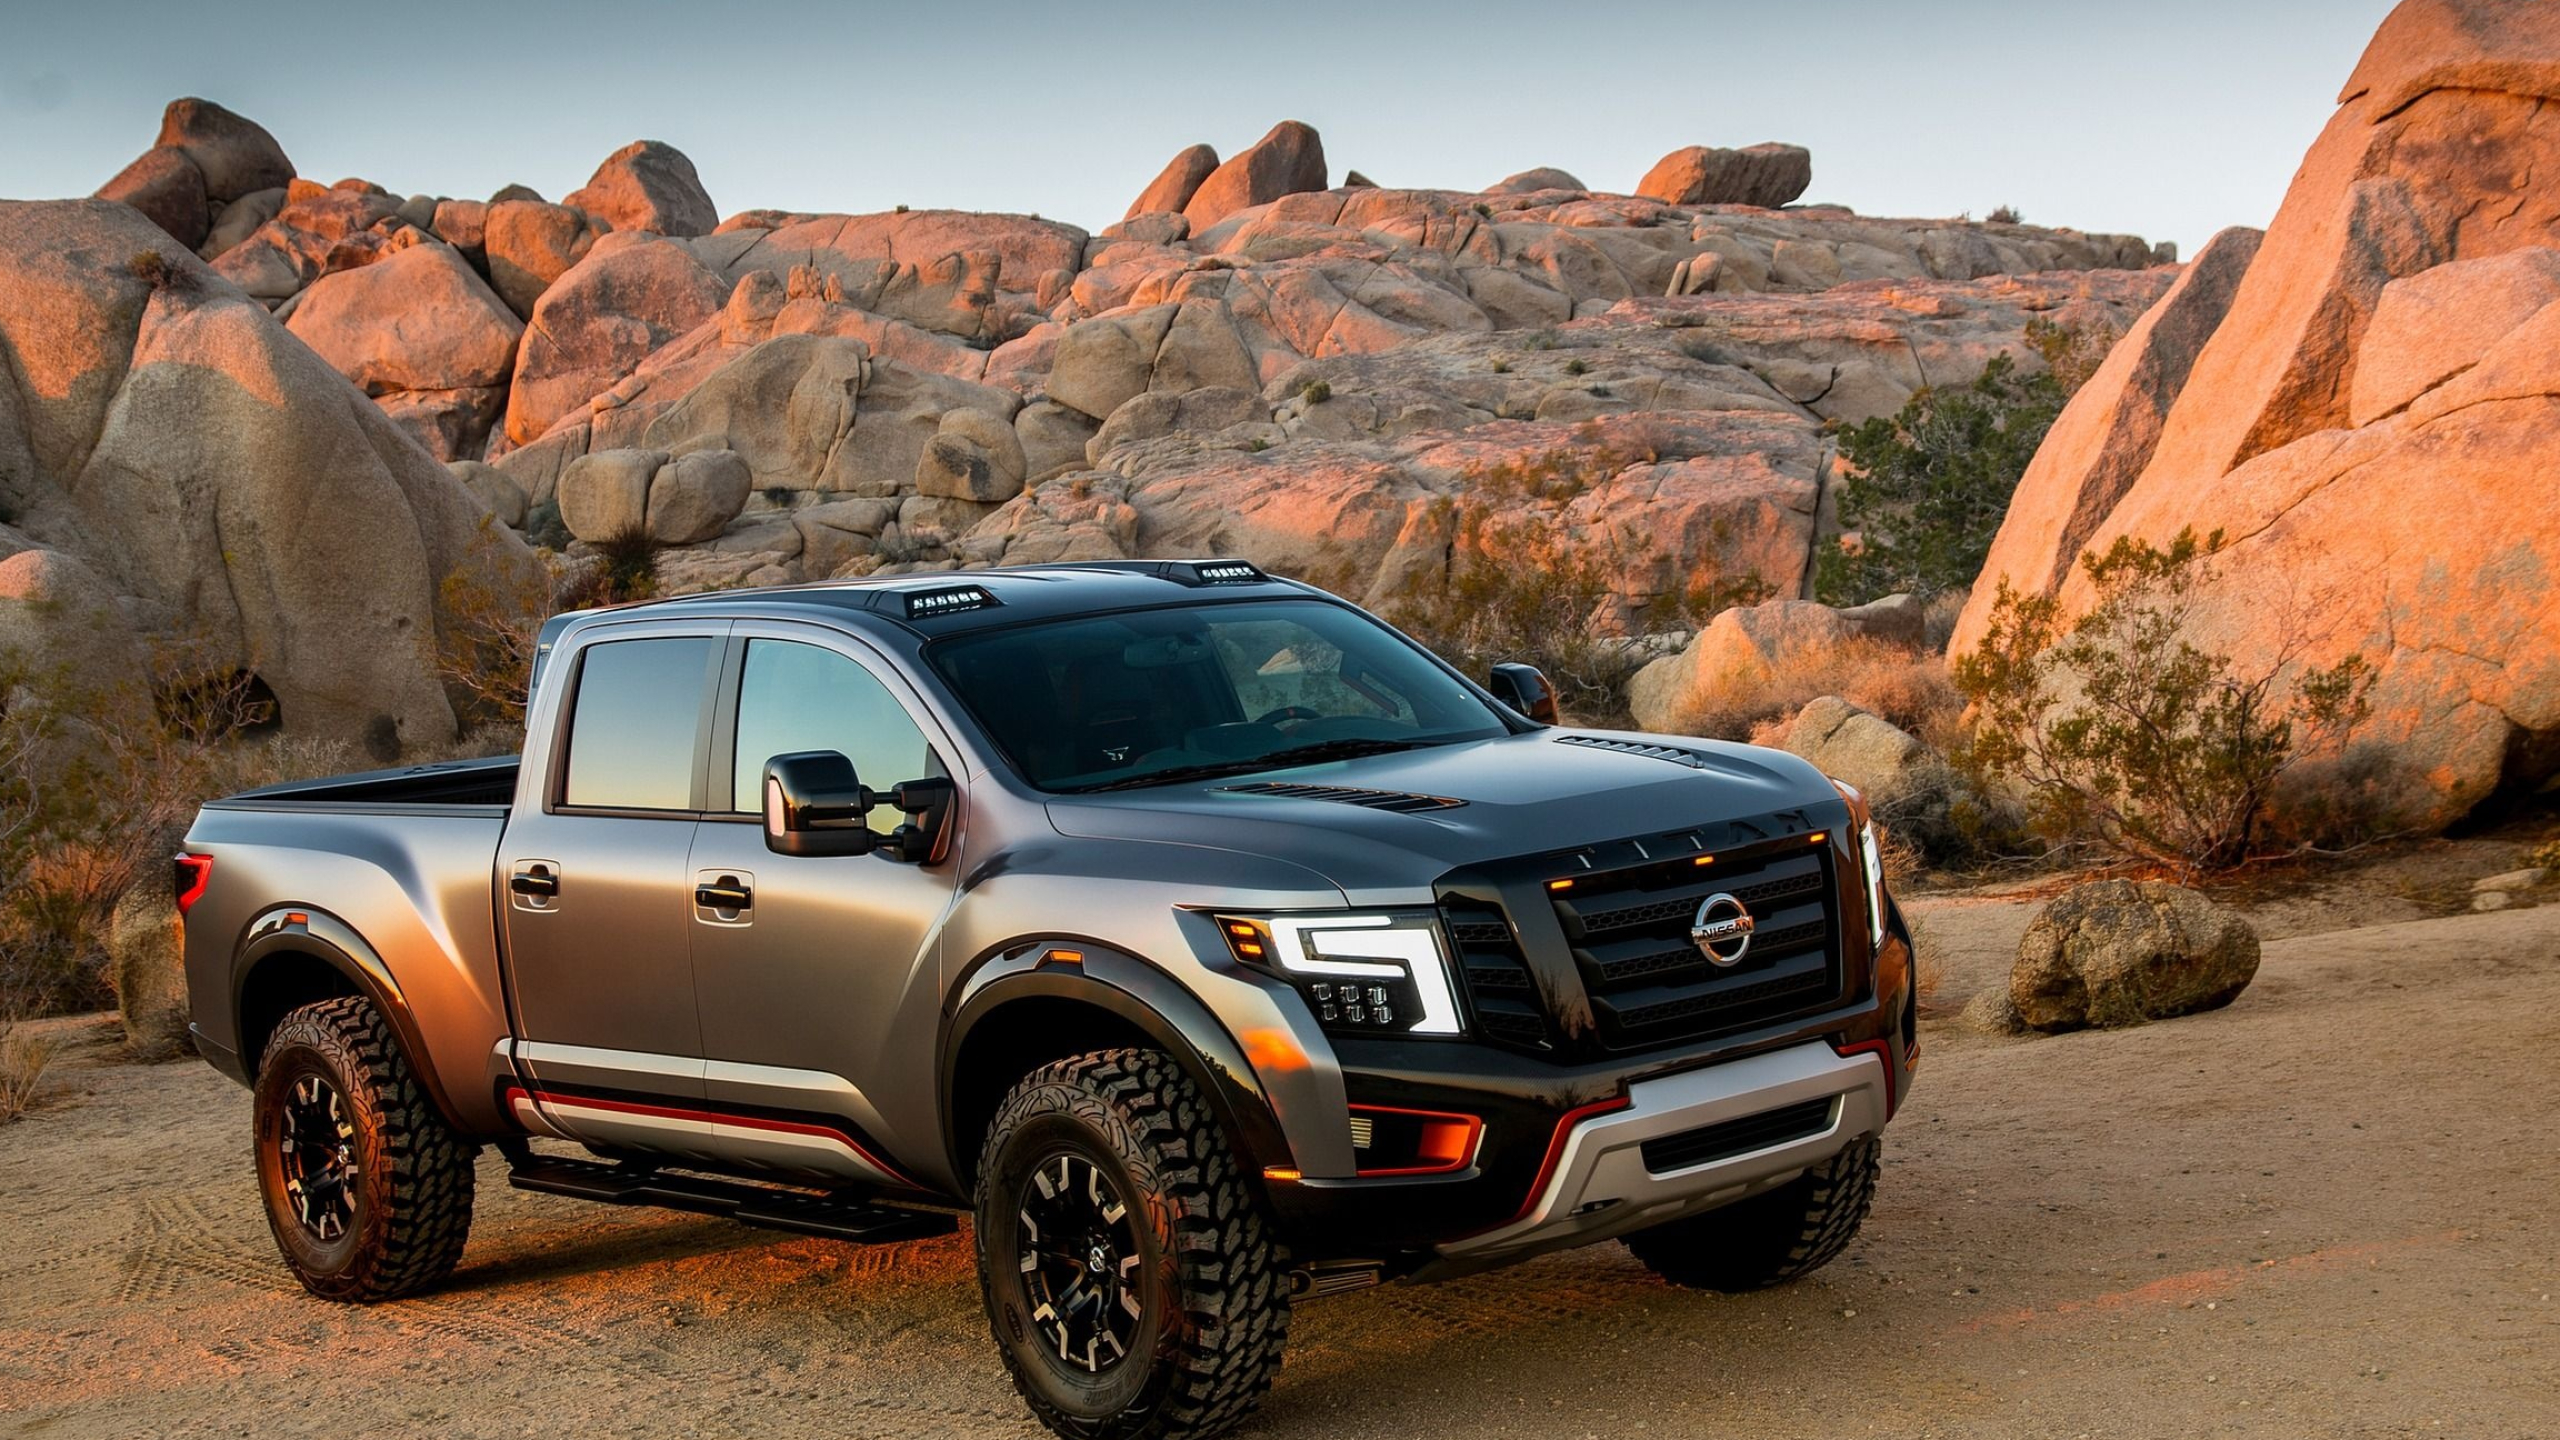 Nissan Titan, Powerful and rugged, Top-notch performance, Versatile and reliable, 2560x1440 HD Desktop